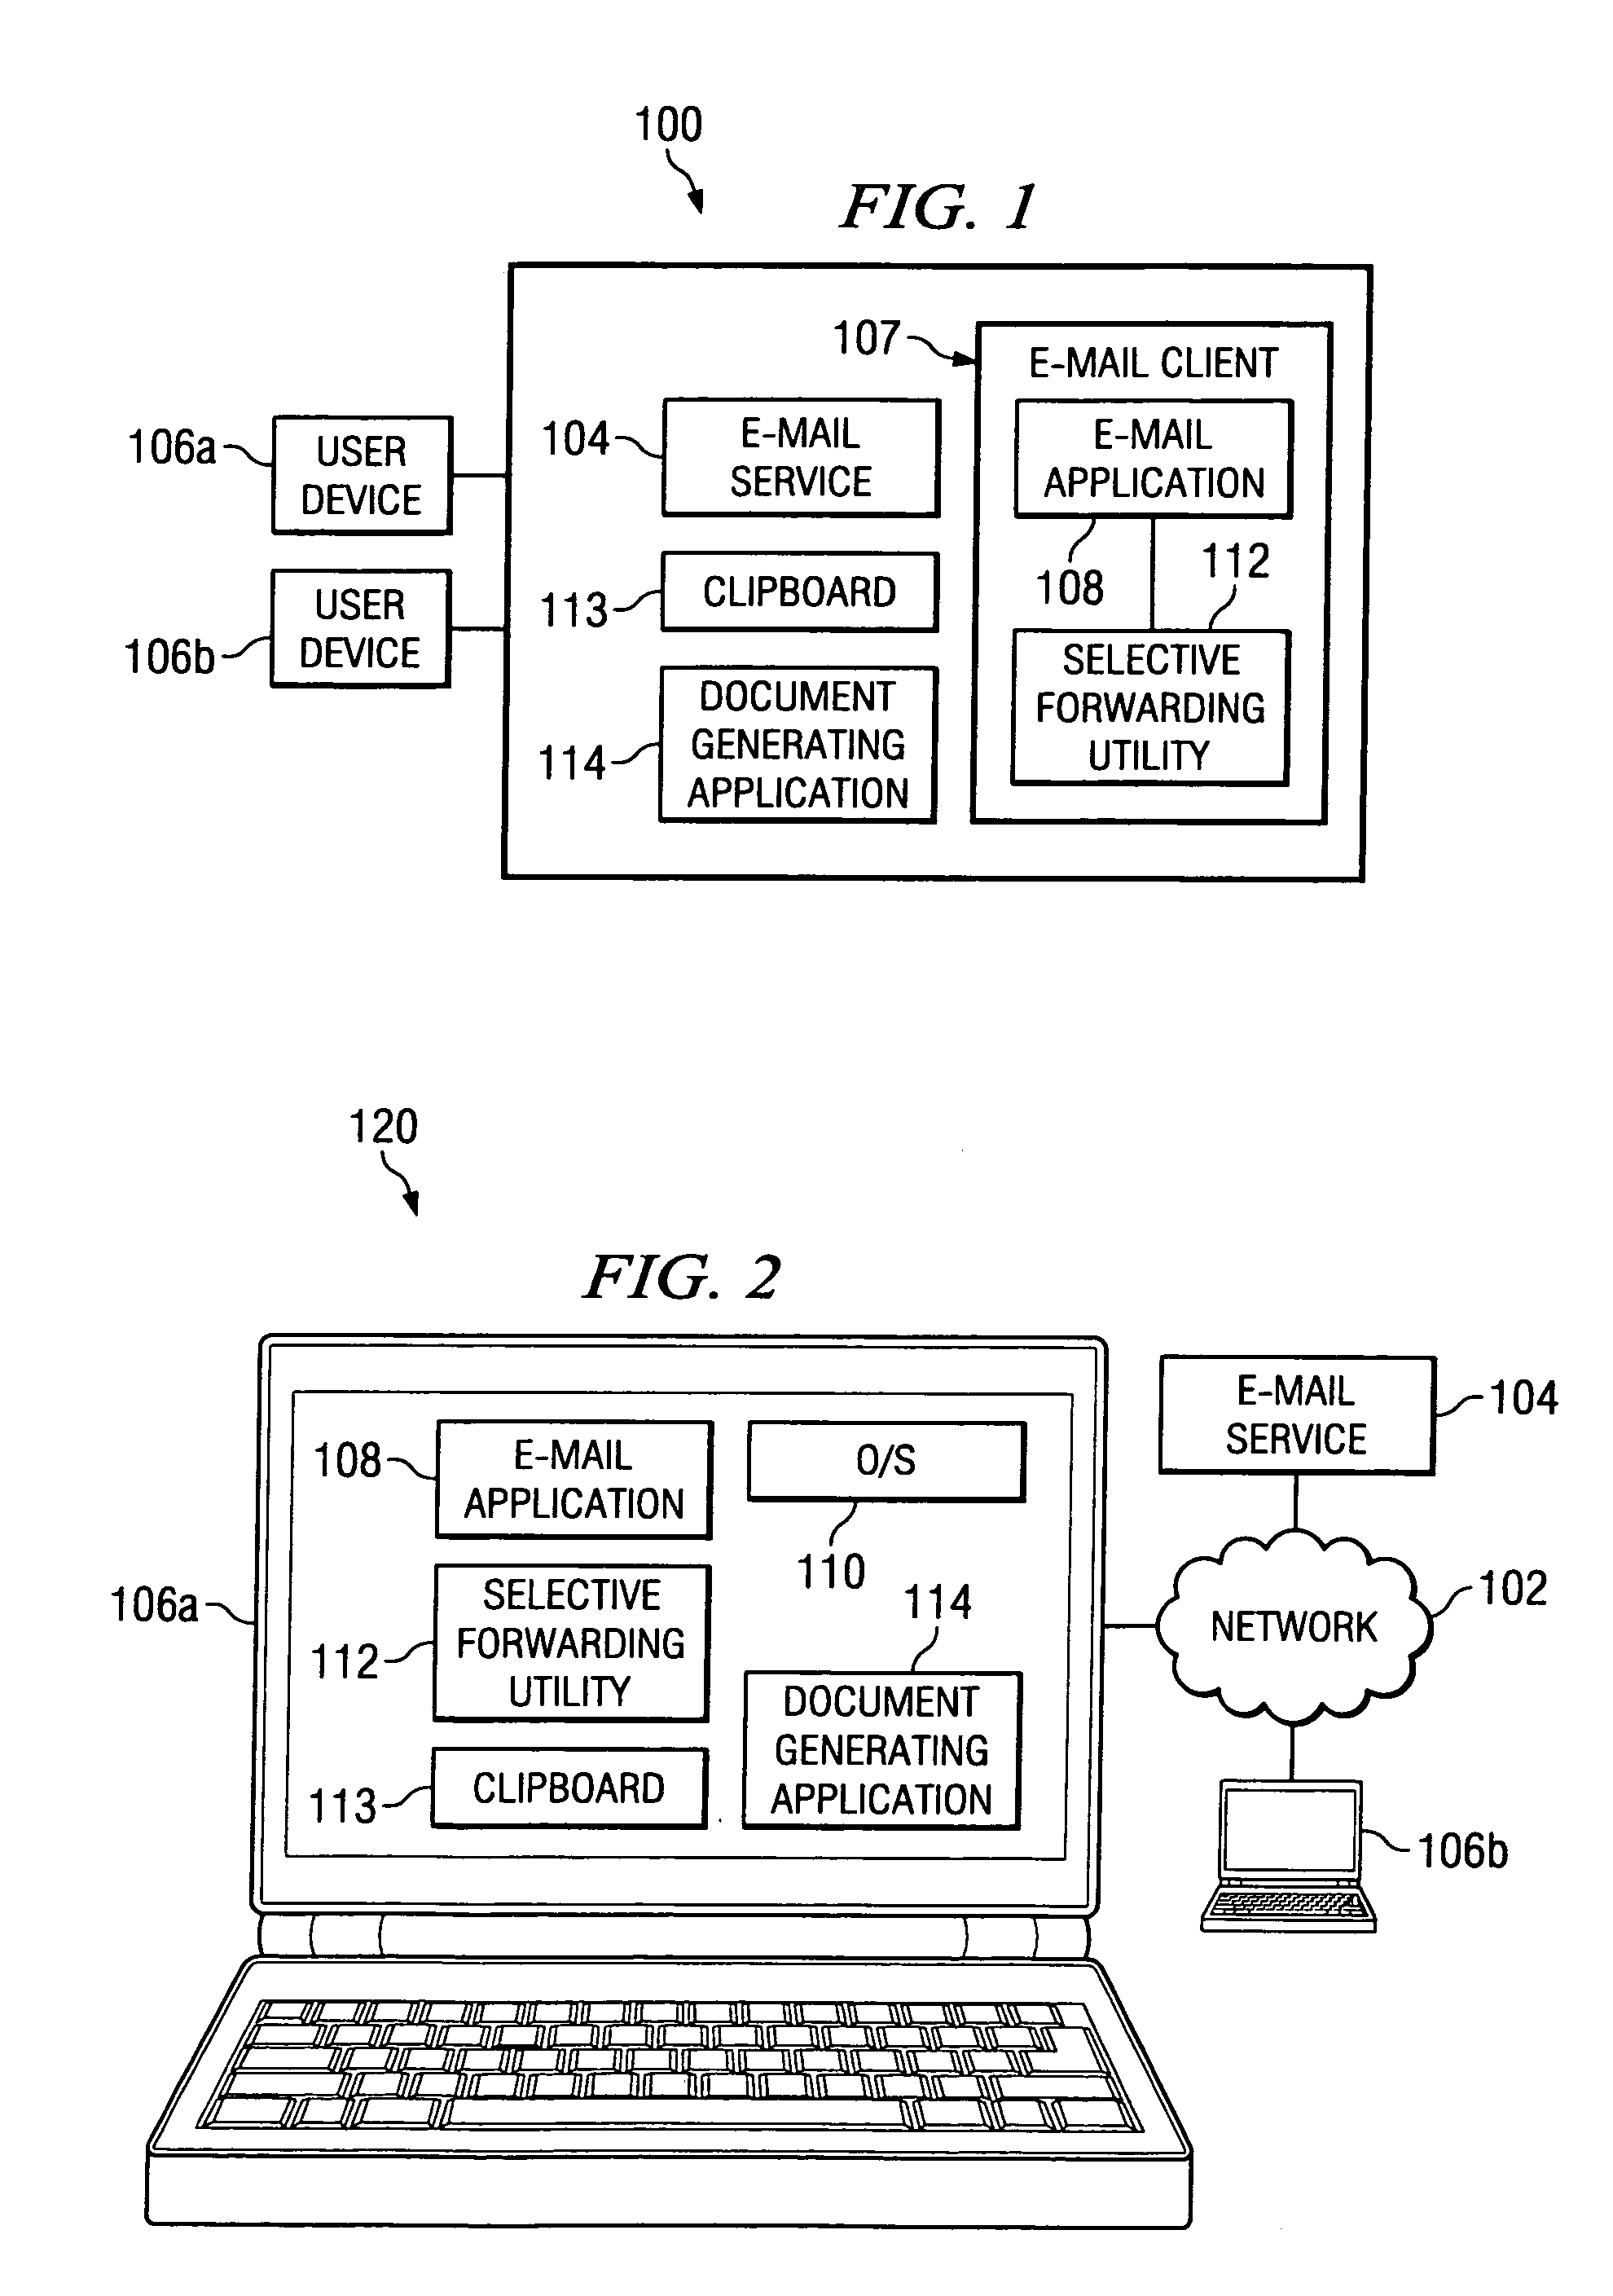 Method and apparatus for selective forwarding of e-mail and document content